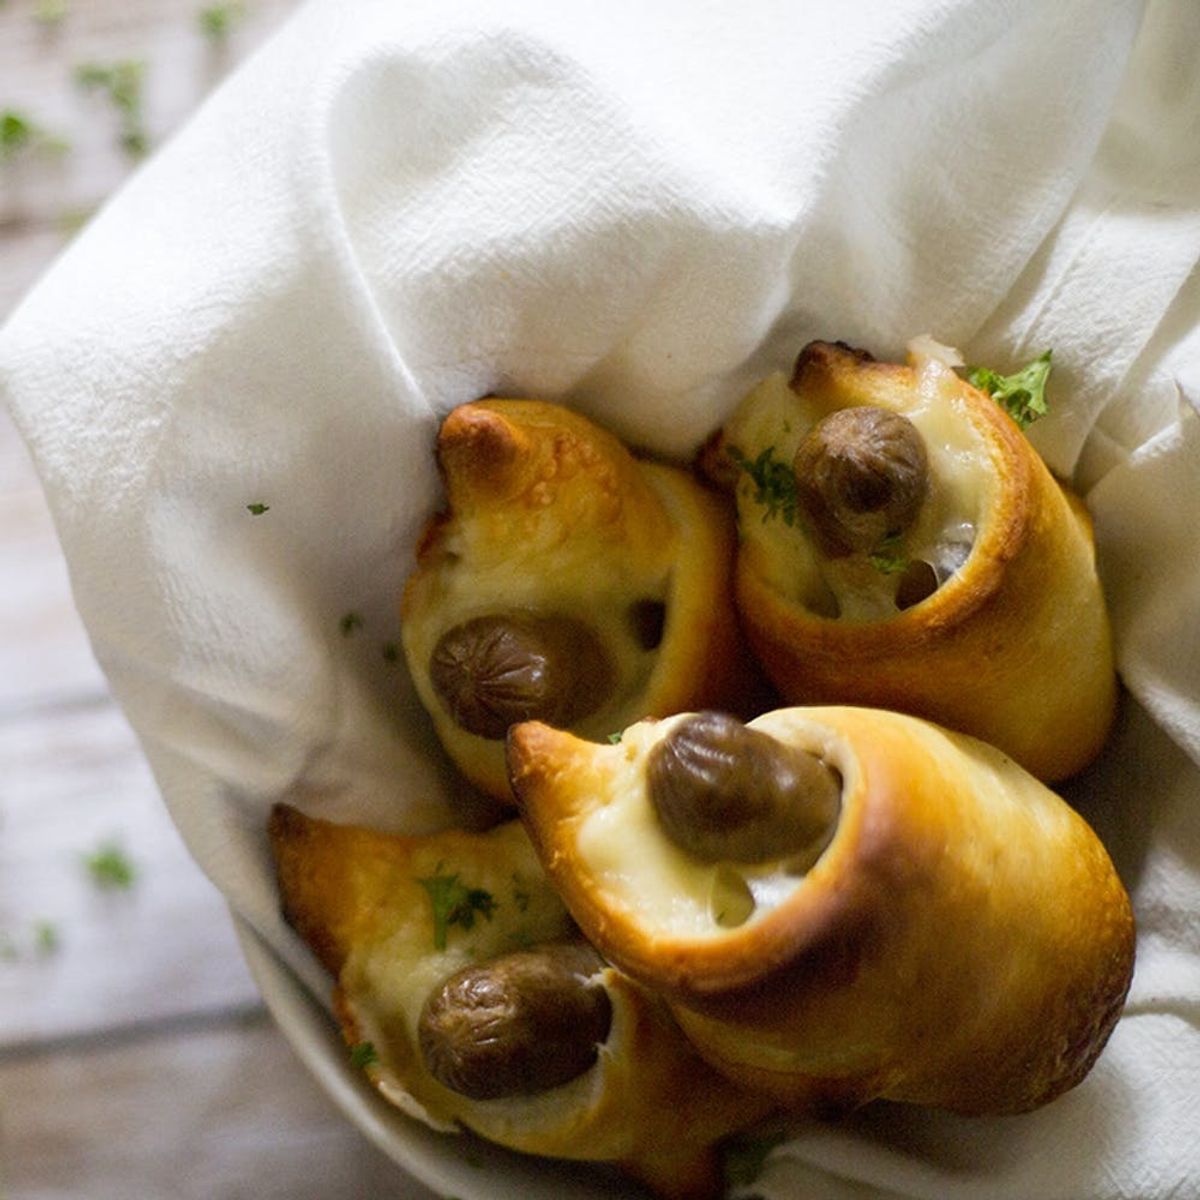 Try This Not-Pigs-in-a-Blanket Recipe to Satisfy Comfort Food Cravings